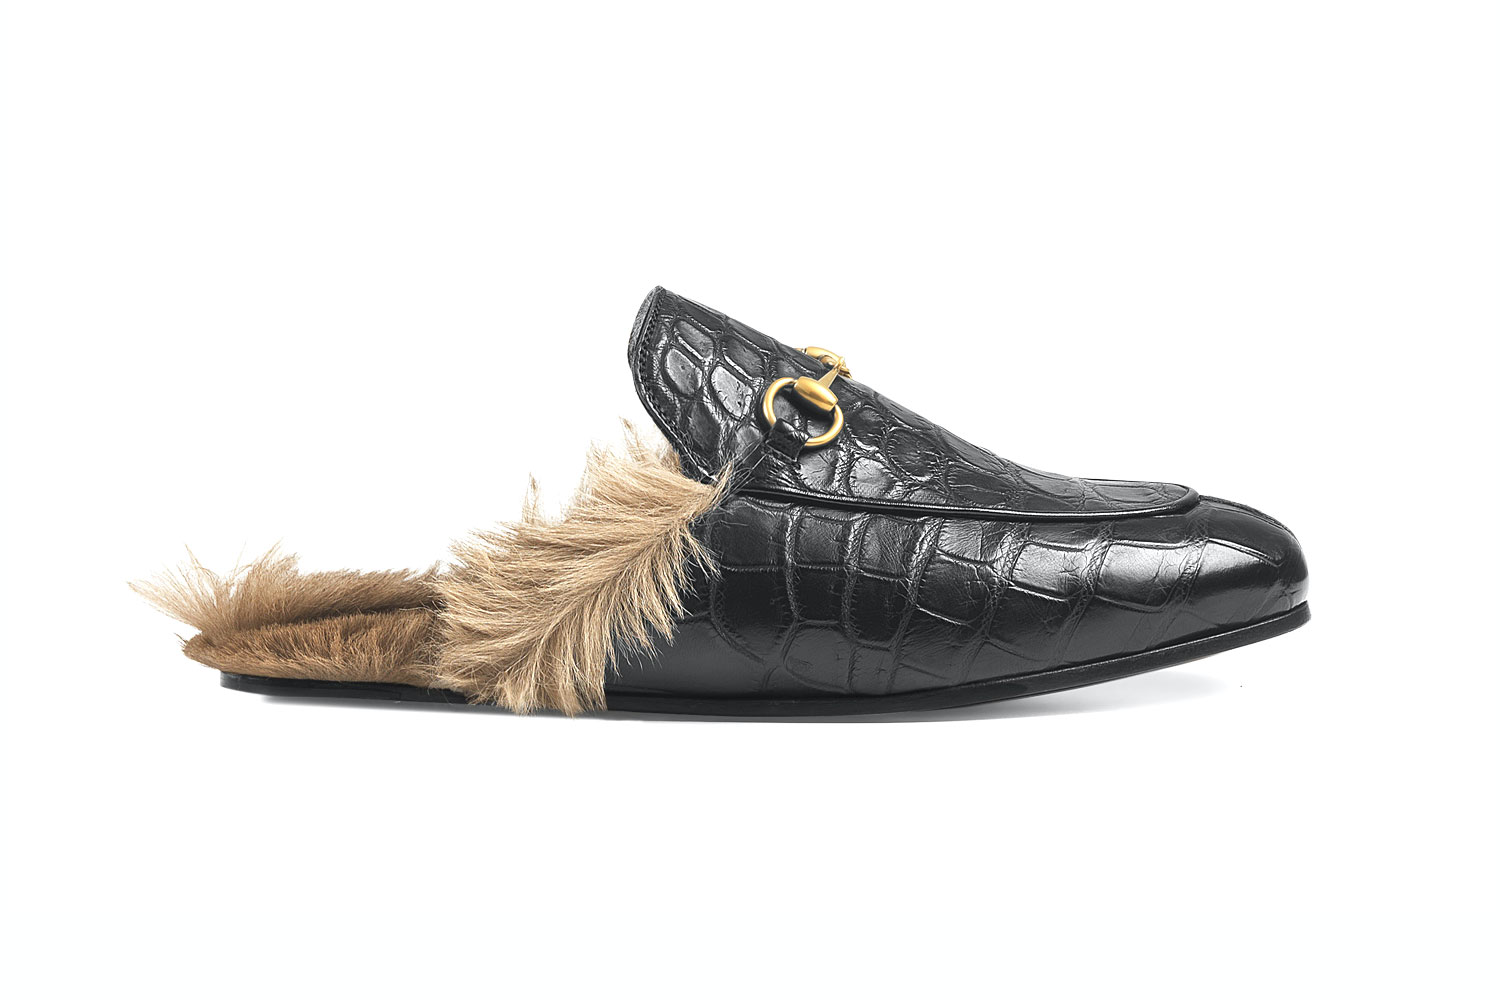 Shoes for men: Here are some of the most expensive shoes in the